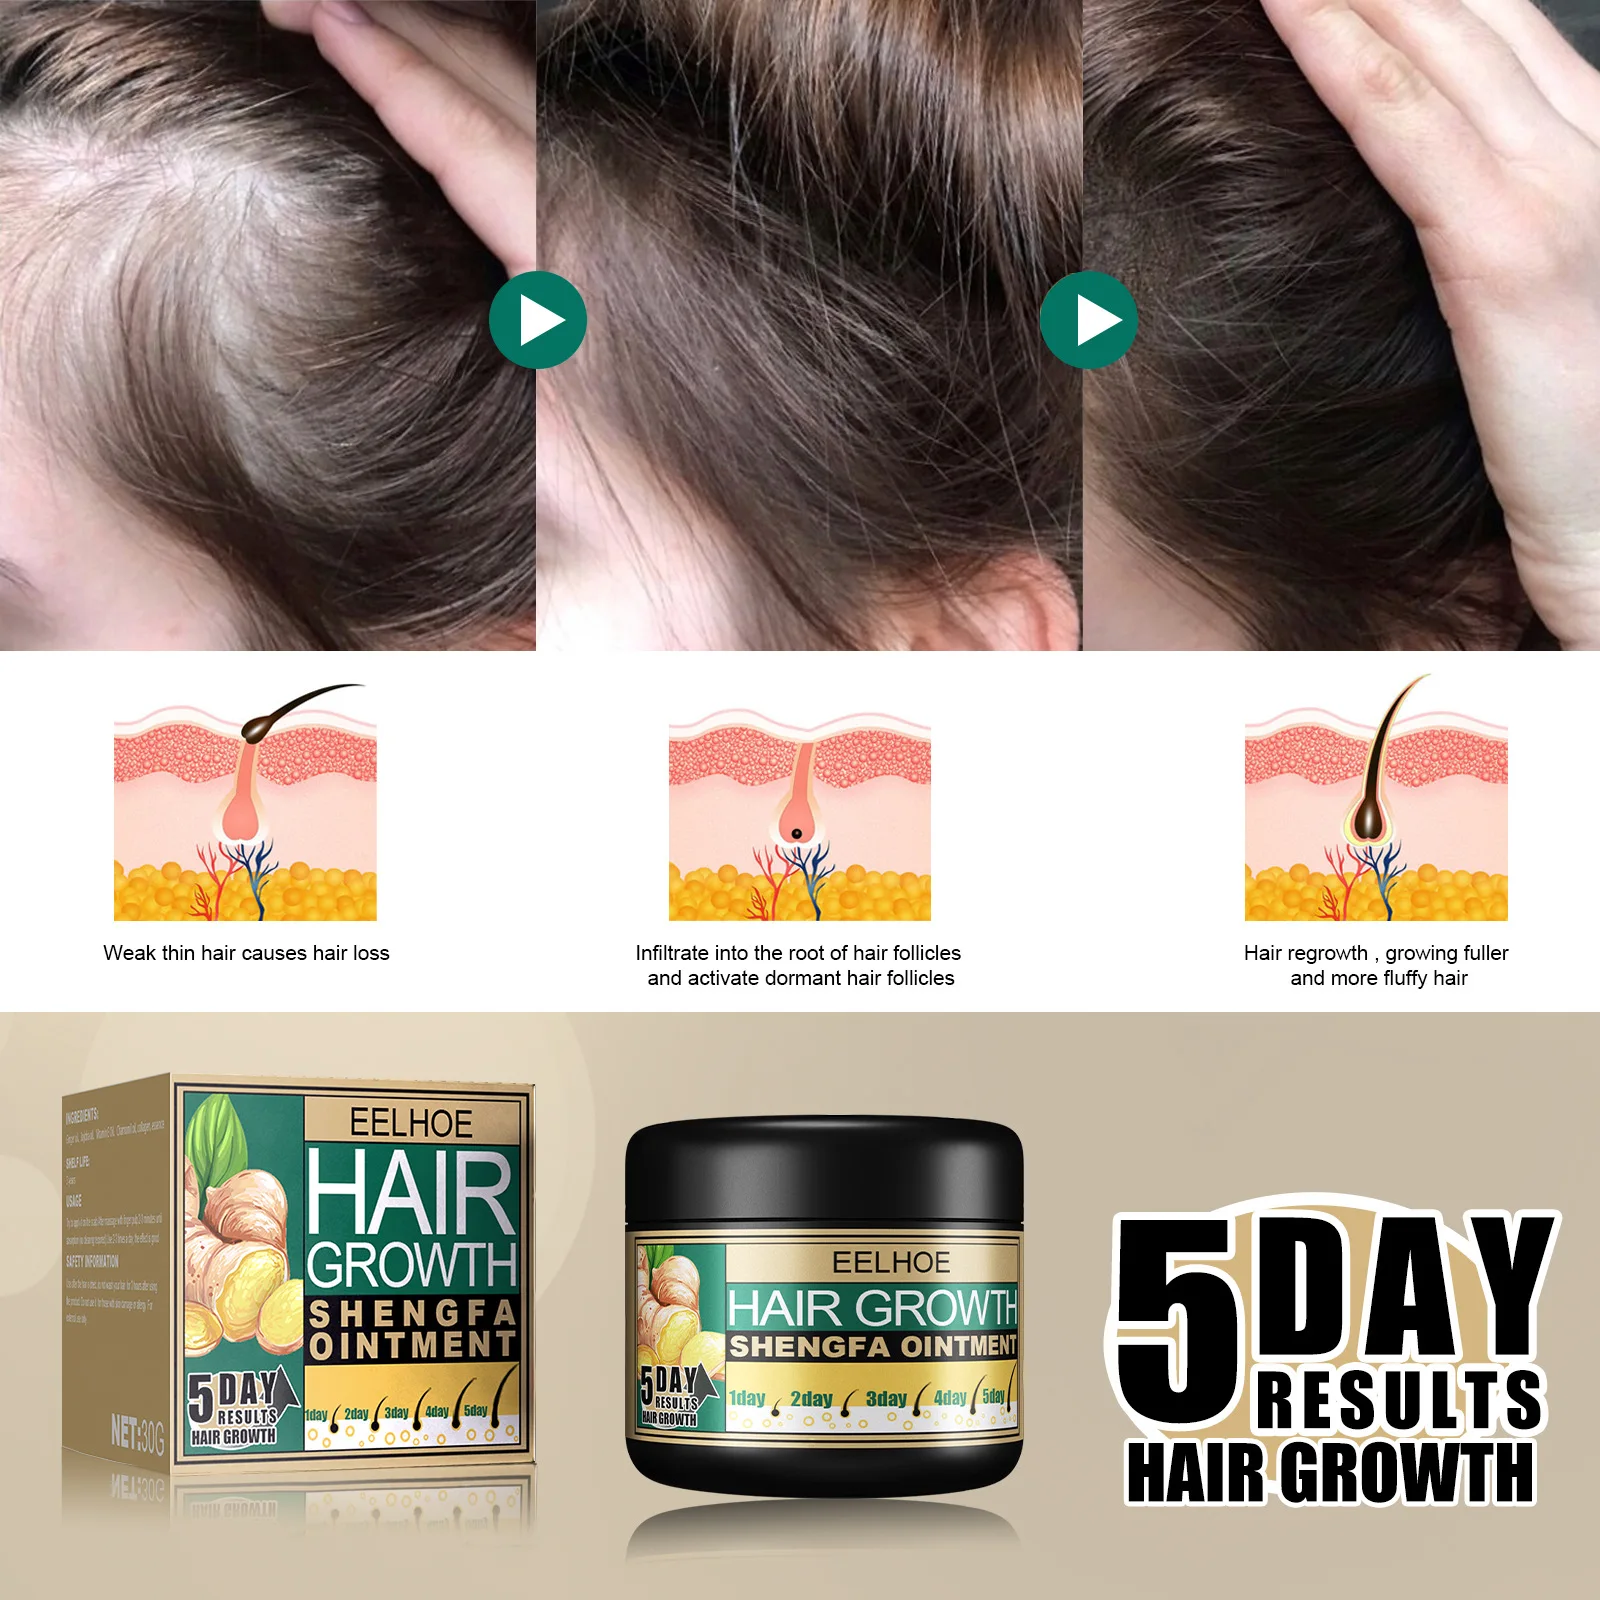 Ginger hair care cream for hair growth, dandruff removal, itching relief, stimulation of hair follicle regeneration, suppleness